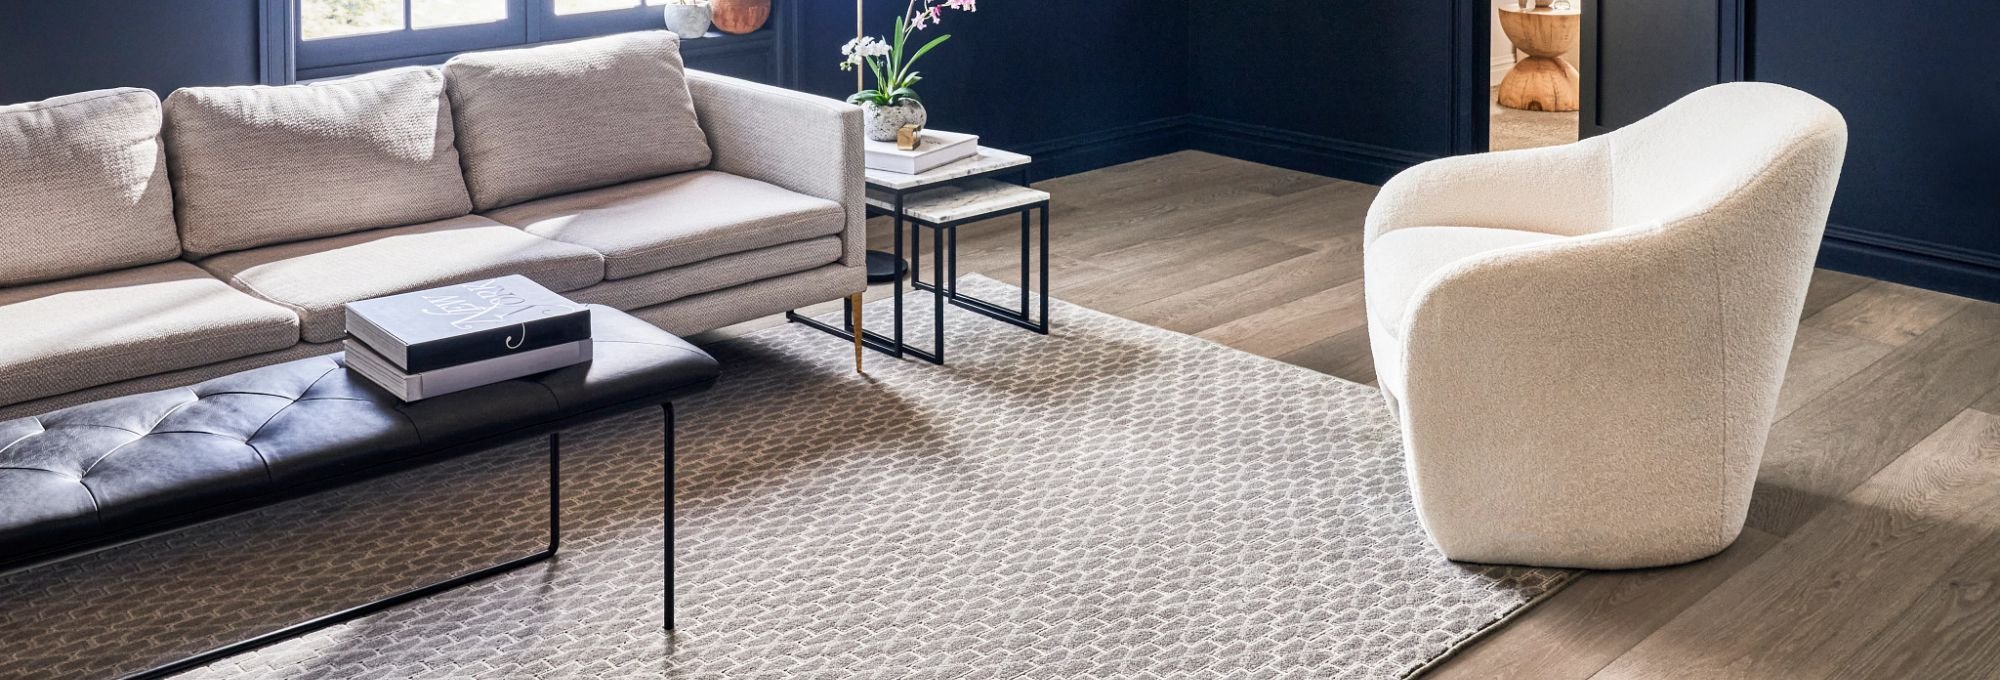 sofa&table on the carpet for livingroom on Cathedral City, CA by Cathedral Canyon Flooring